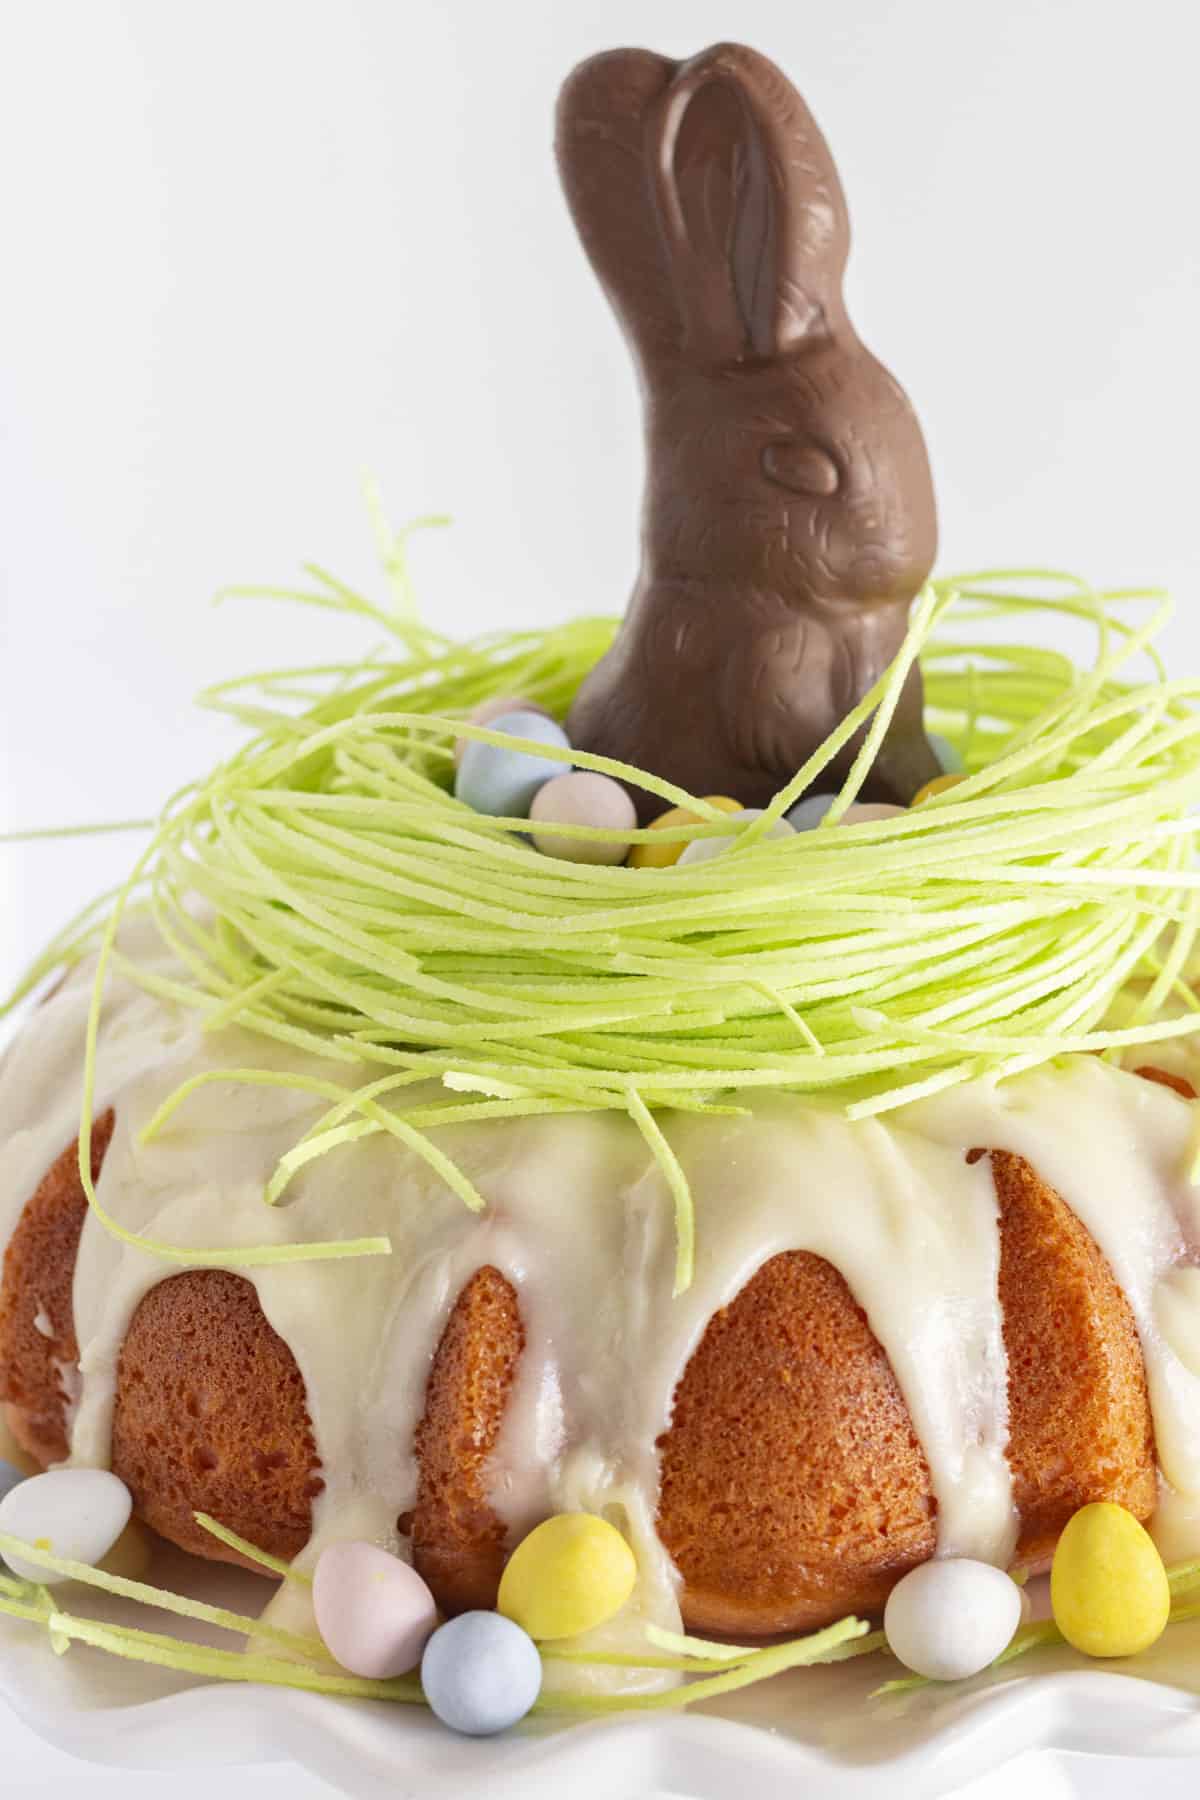 A pink velvet bundt cake decorated with edible grass and a chocolate bunny.